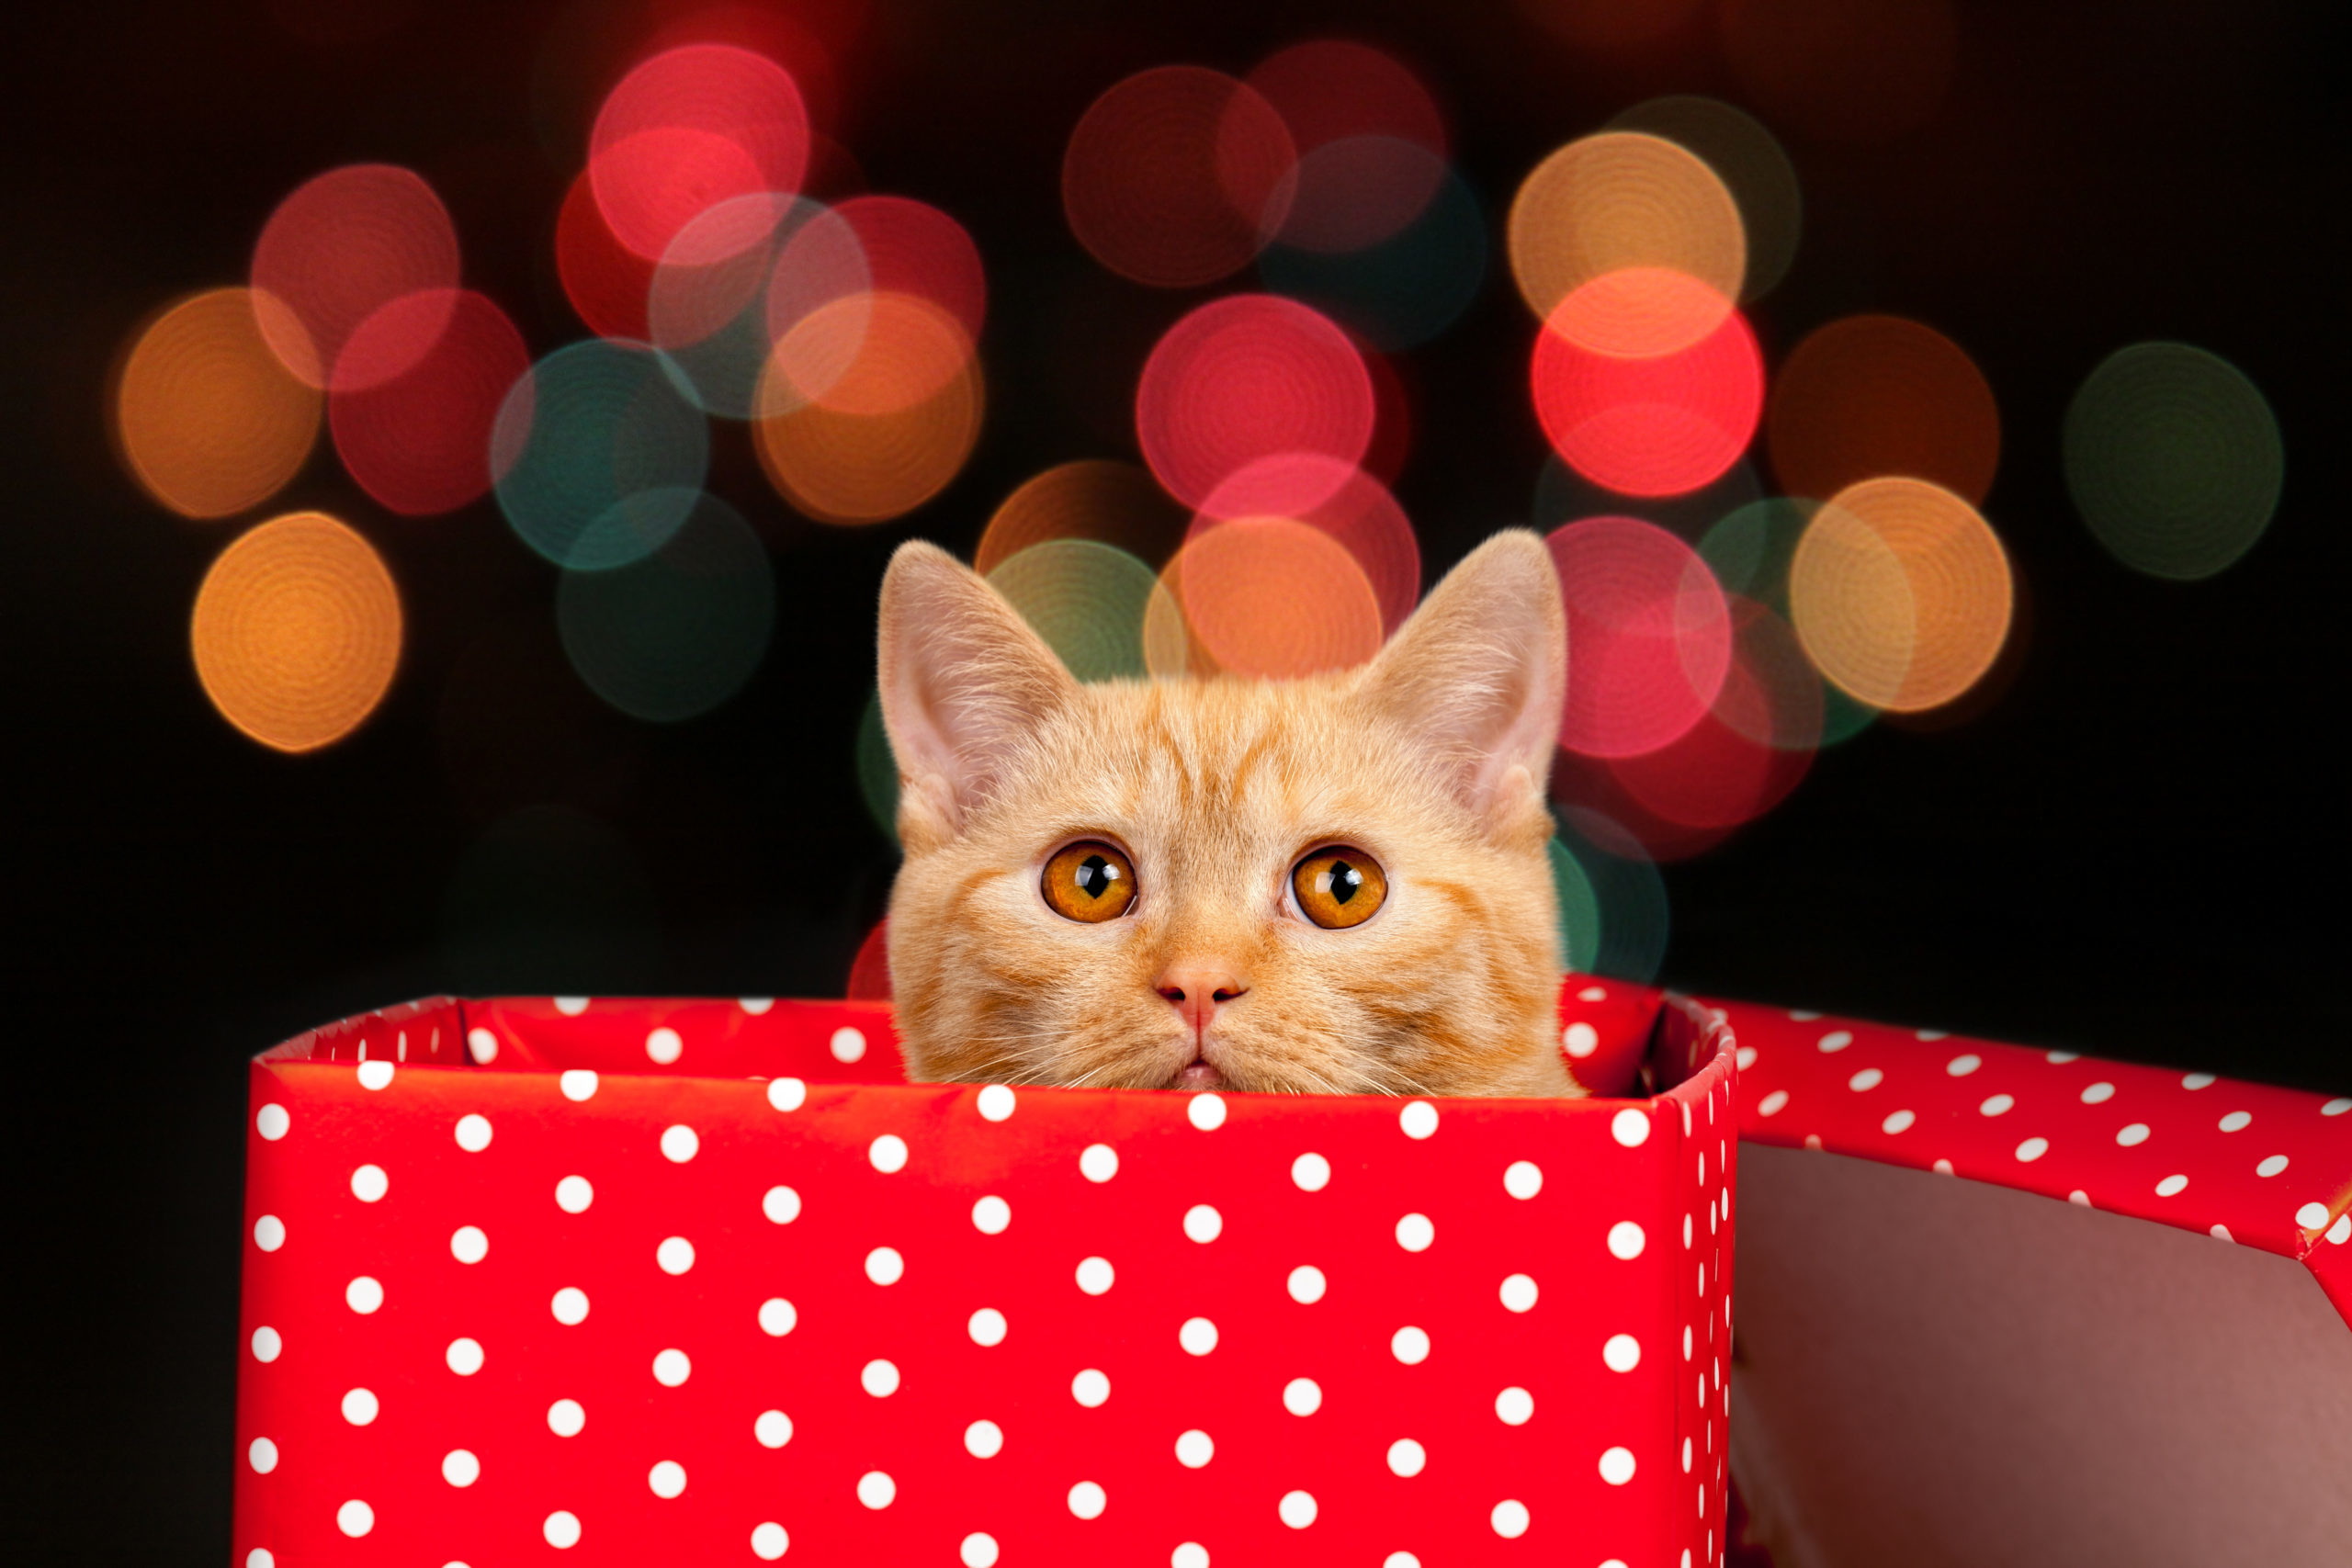 7 Ways to Make the Holidays Safer for Pets